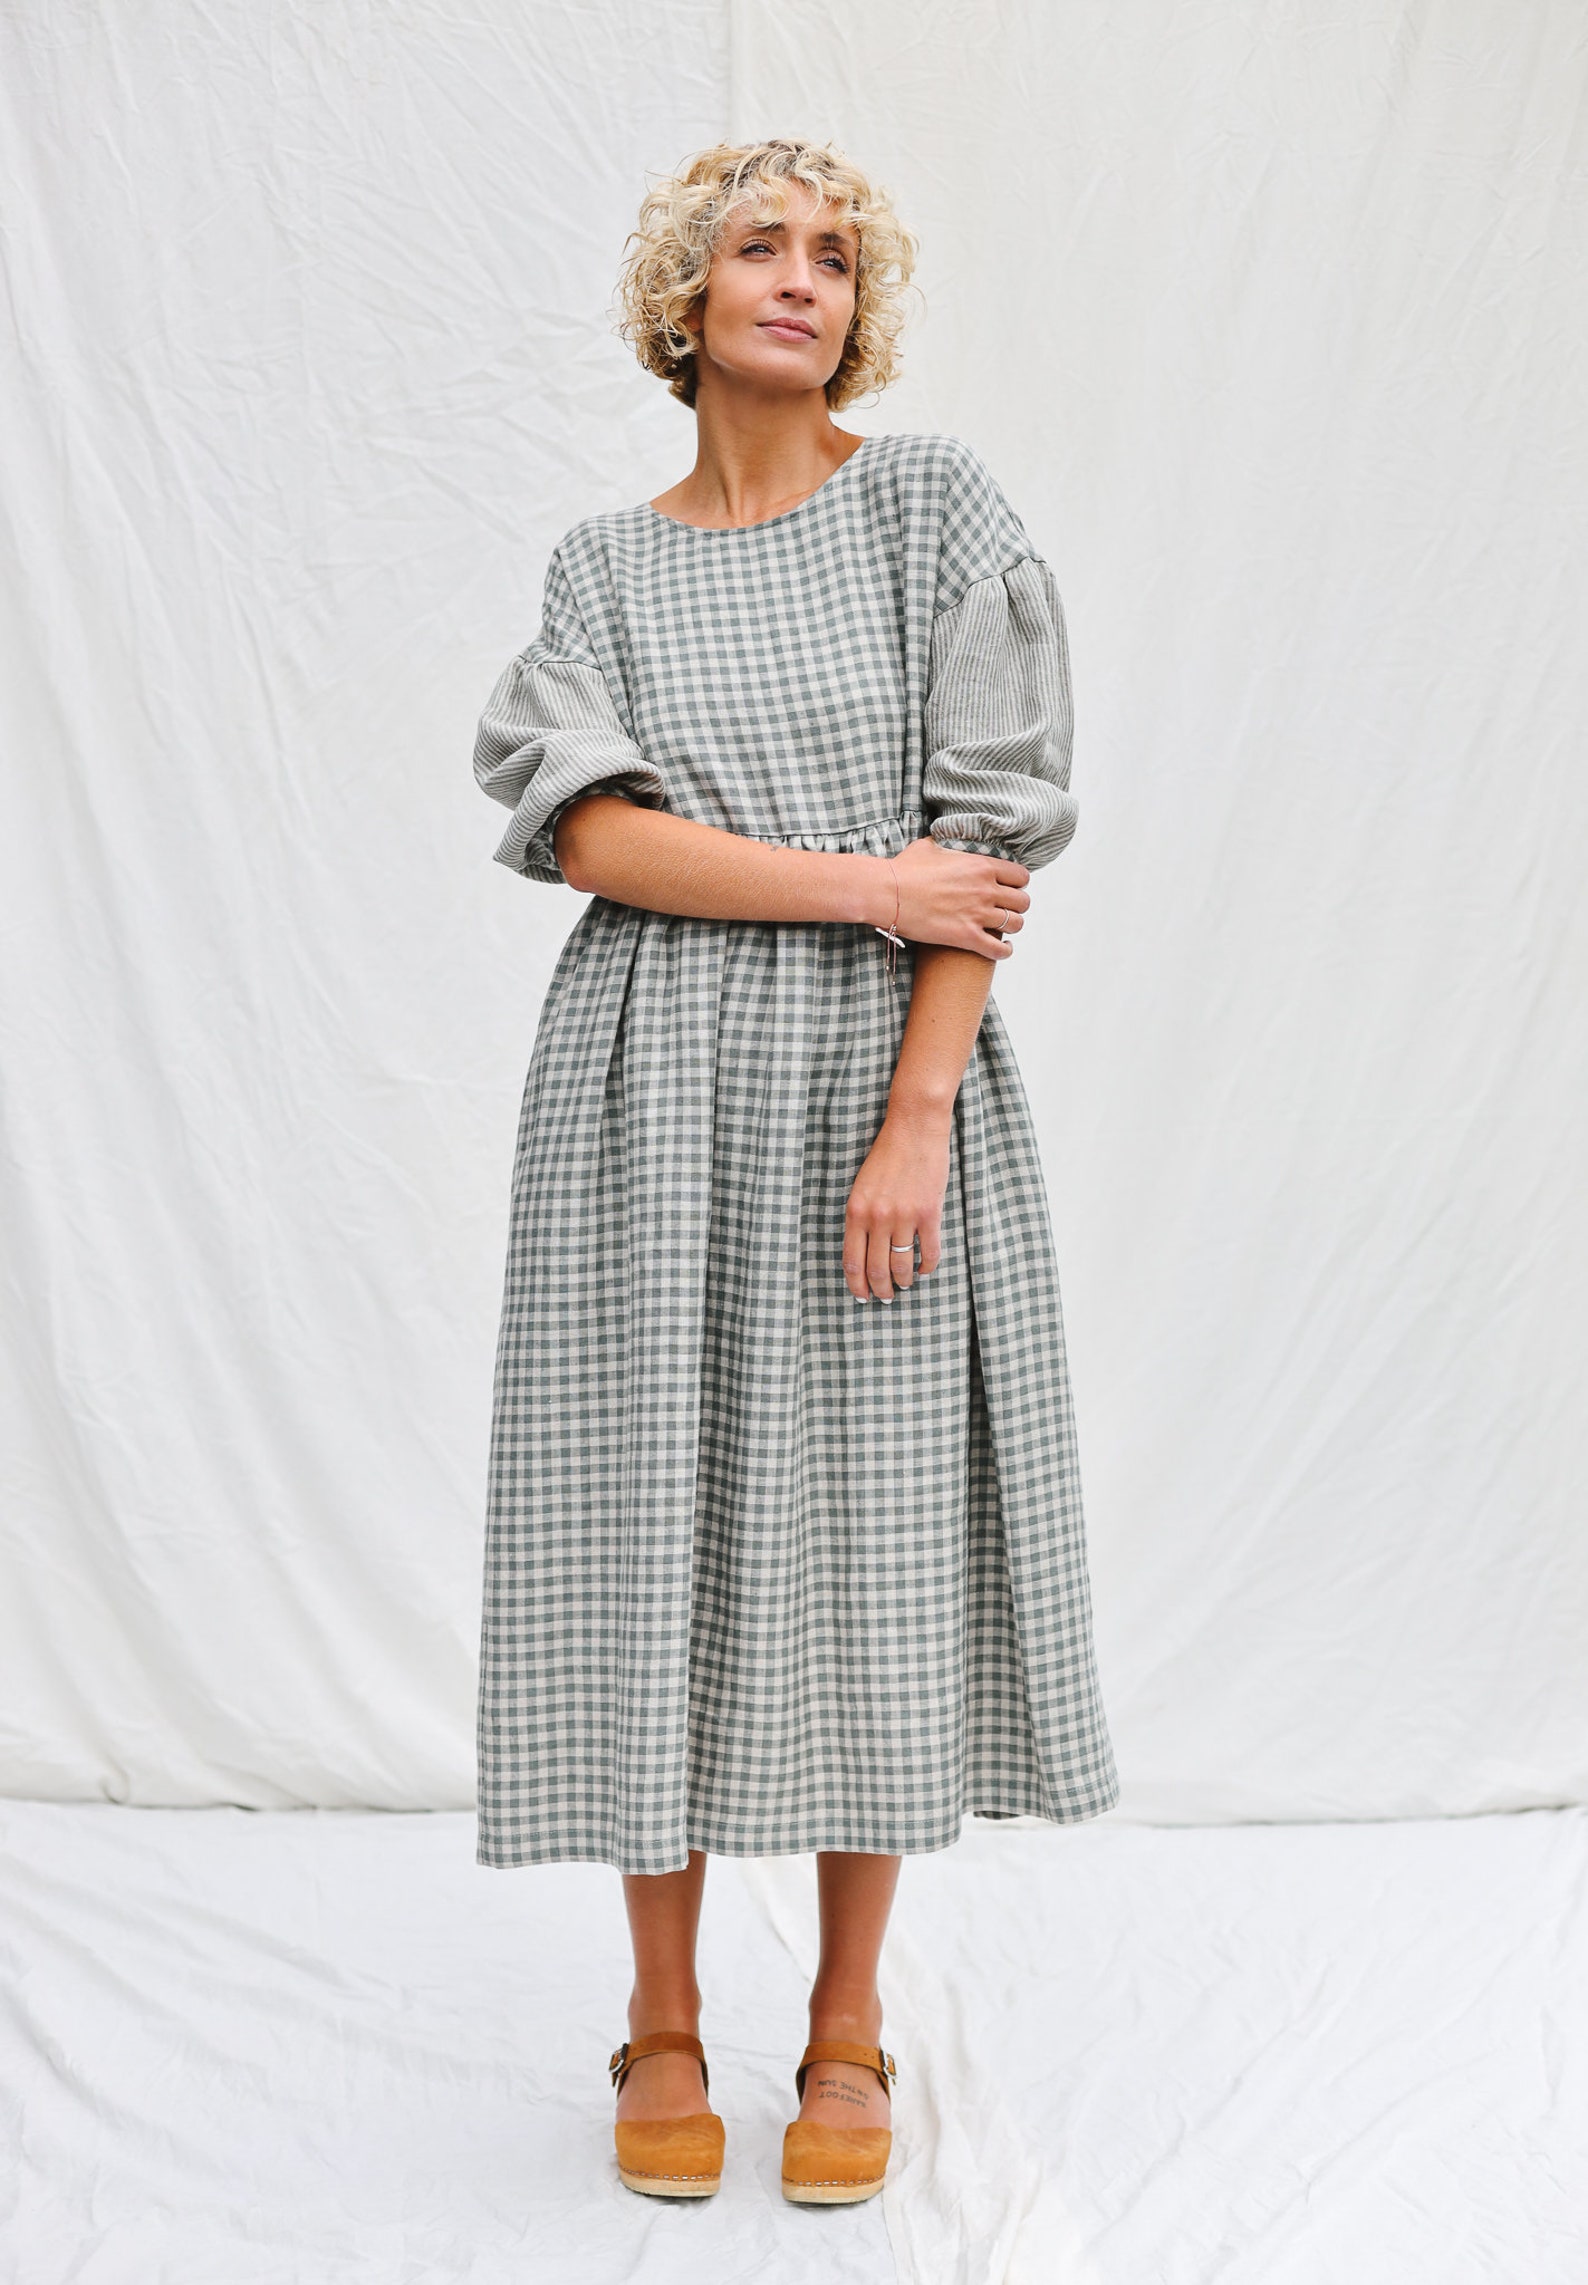 Gingham Linen Dress With Contrasting Striped Puffy Sleeves - Etsy